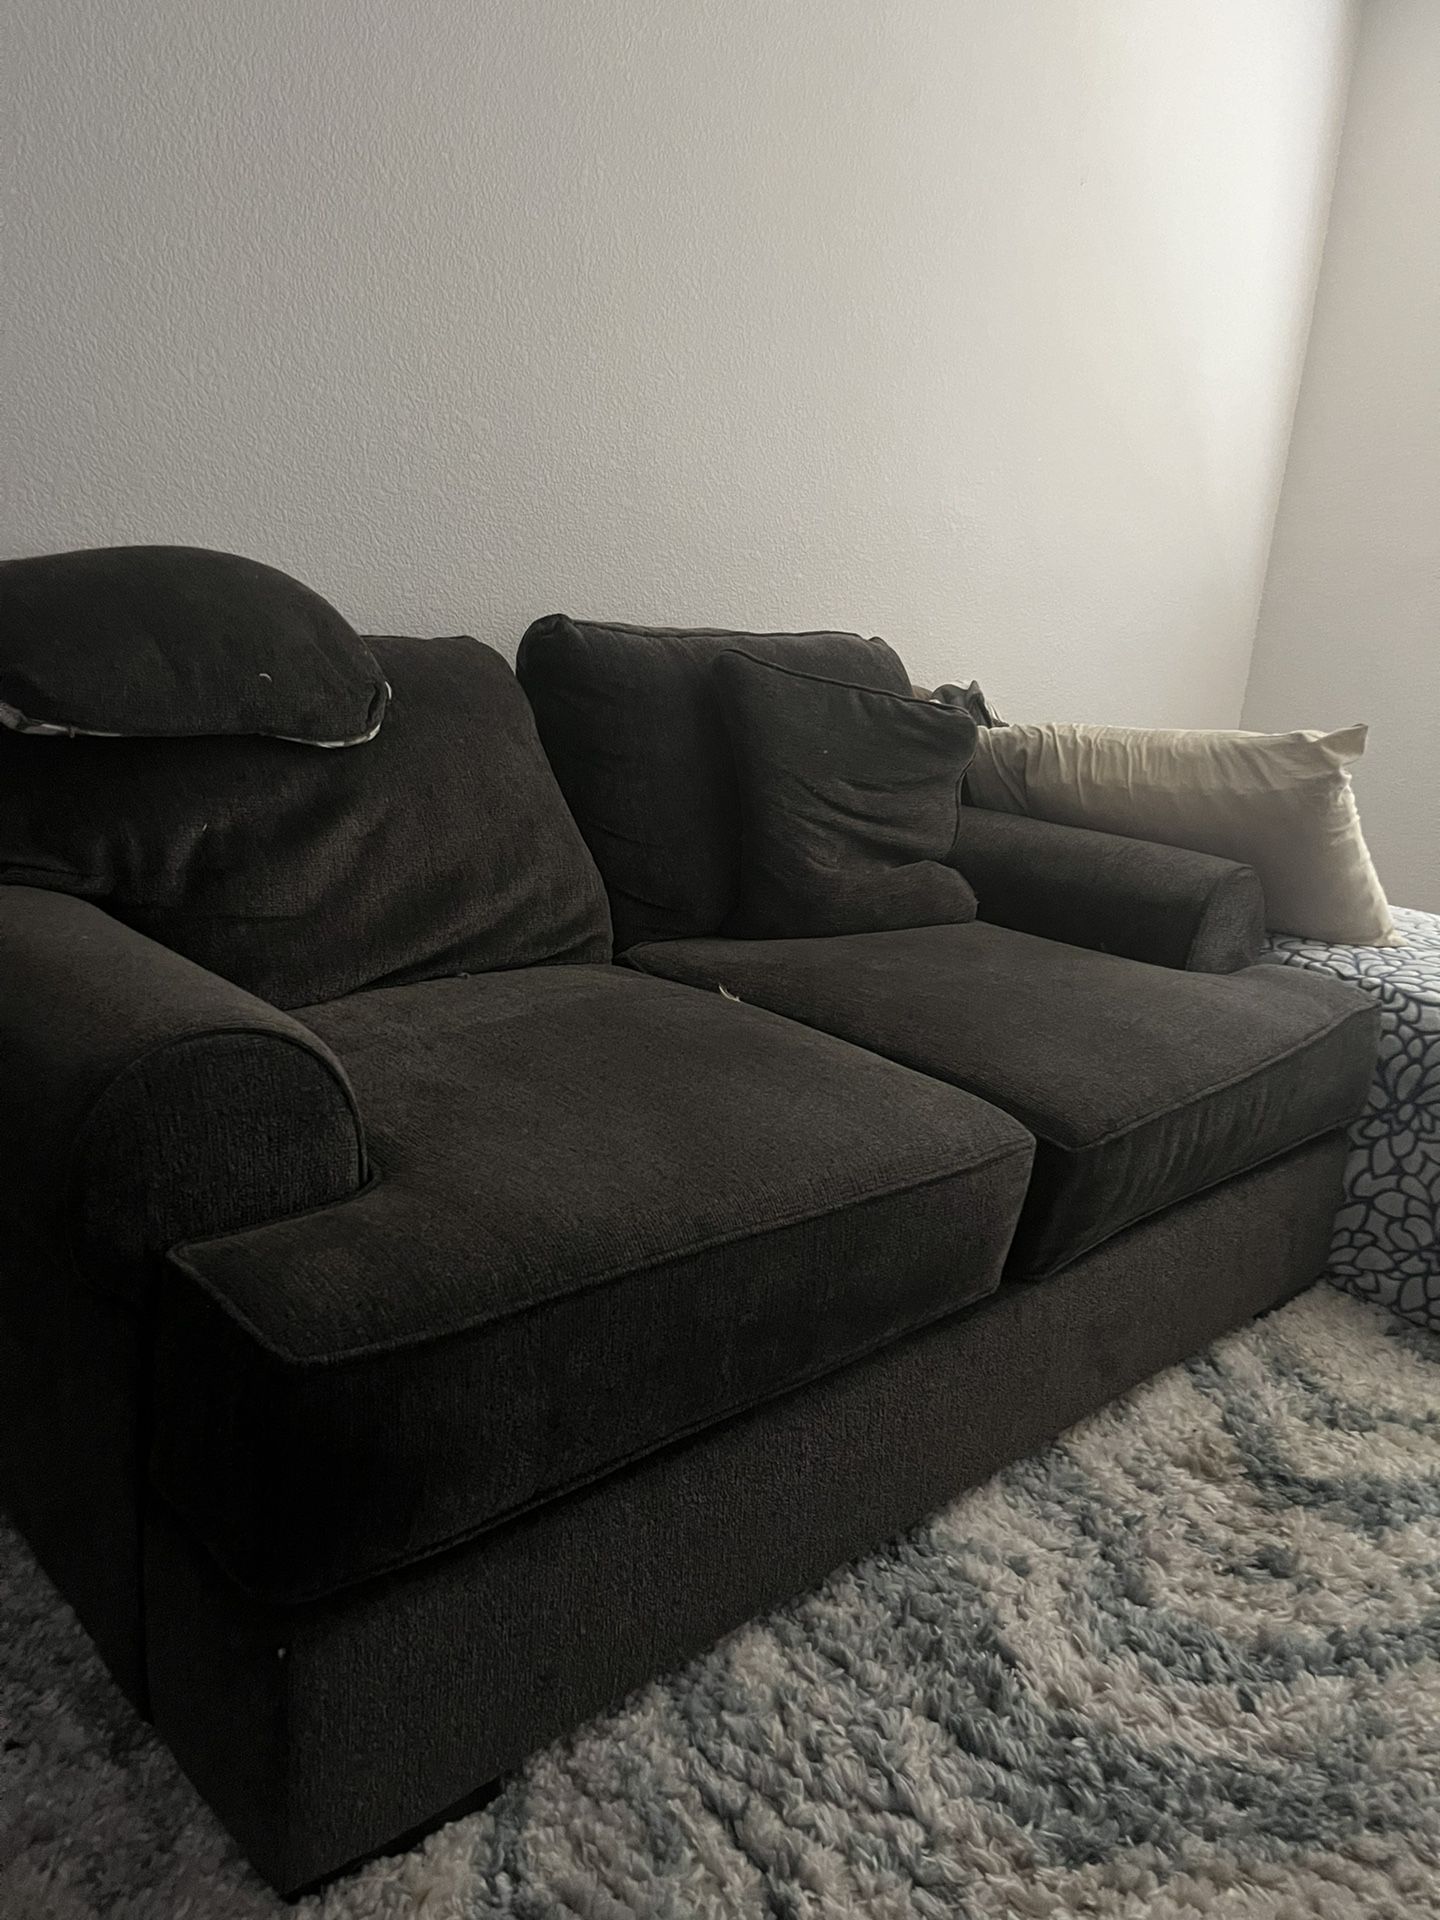 Loveseat - One Year Old